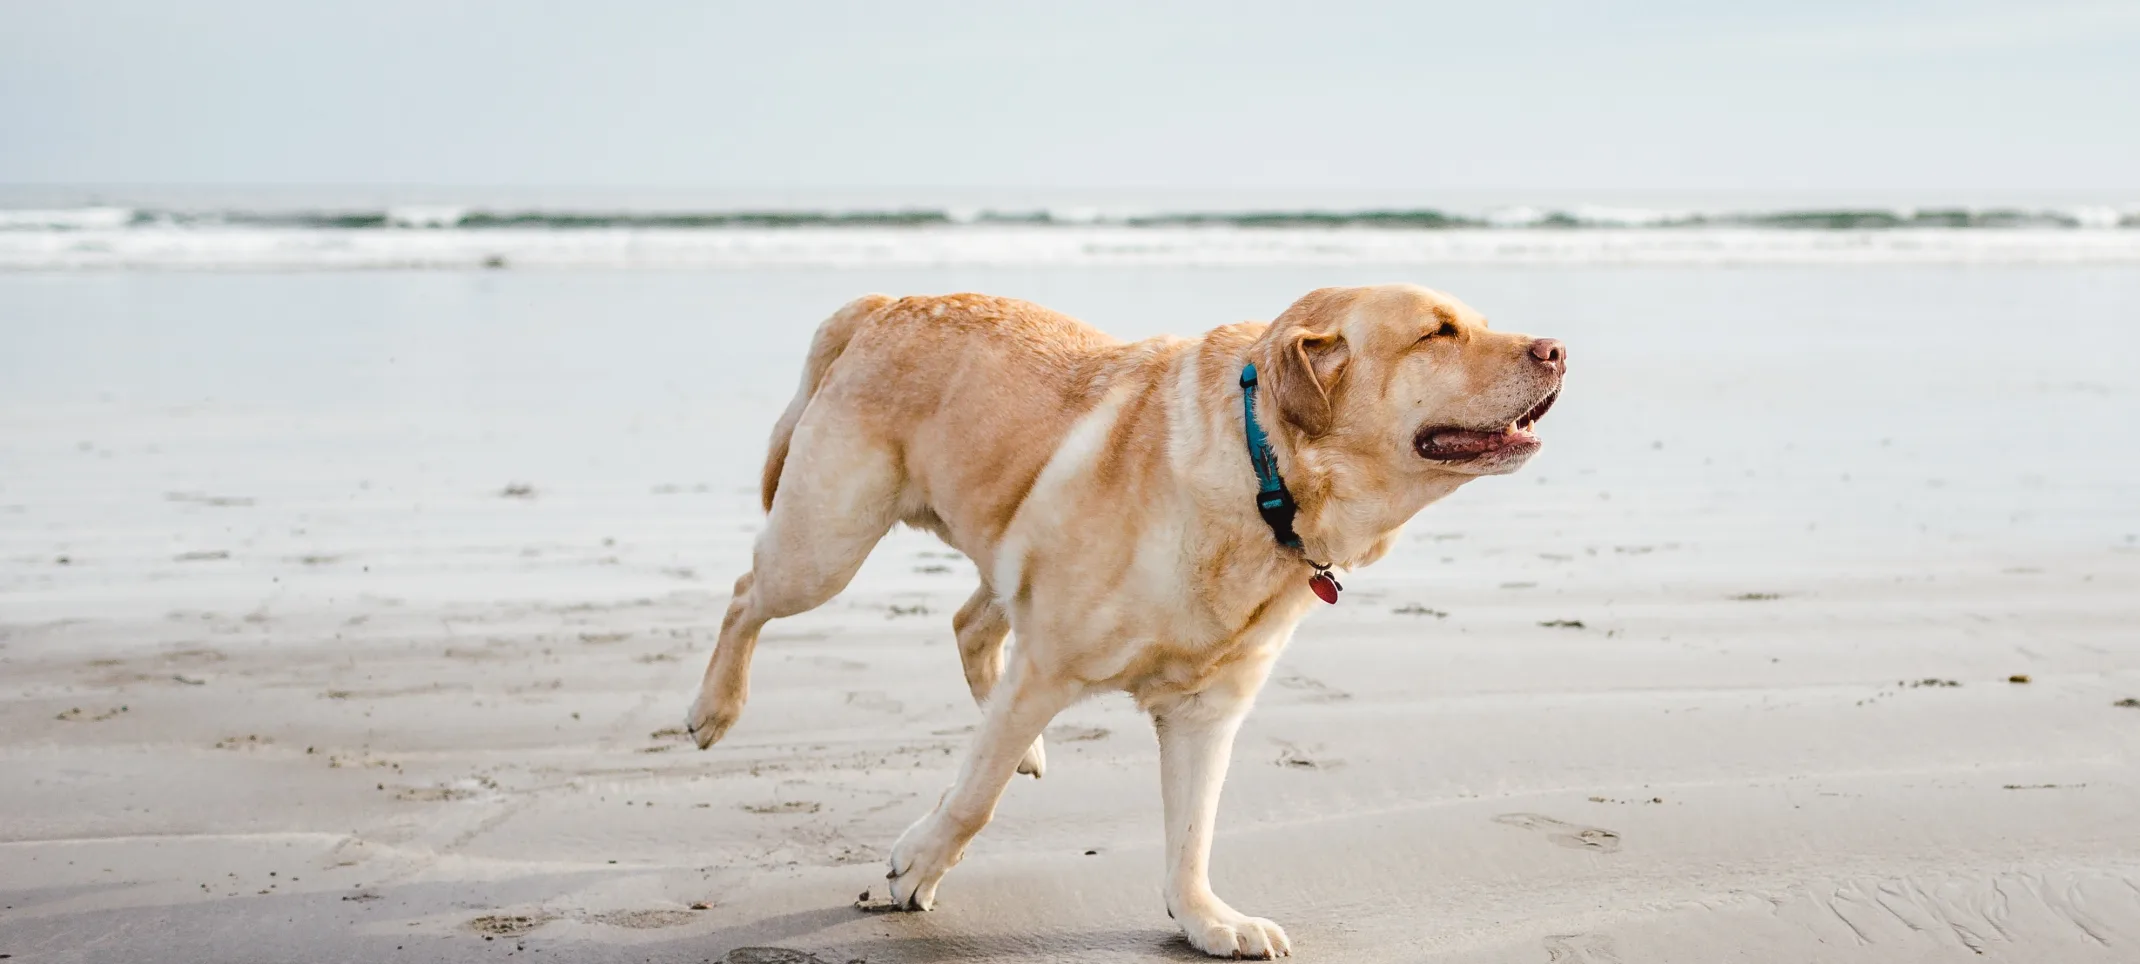 Dog running in the beach towards the right